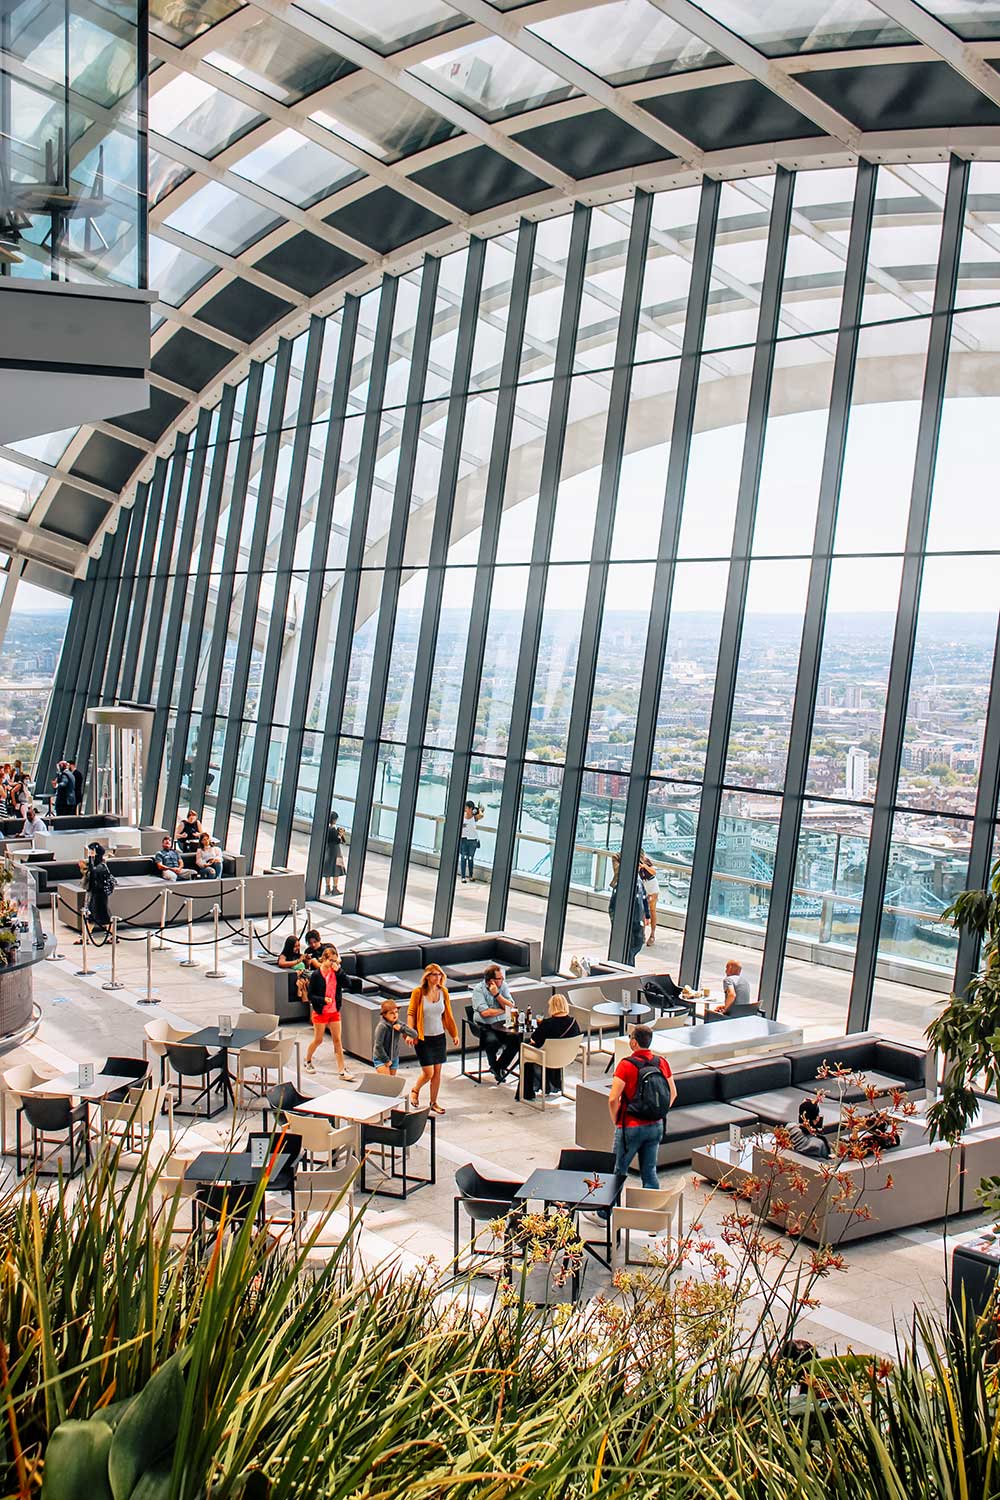 Sky Garden in London - guide to the best free views of the city